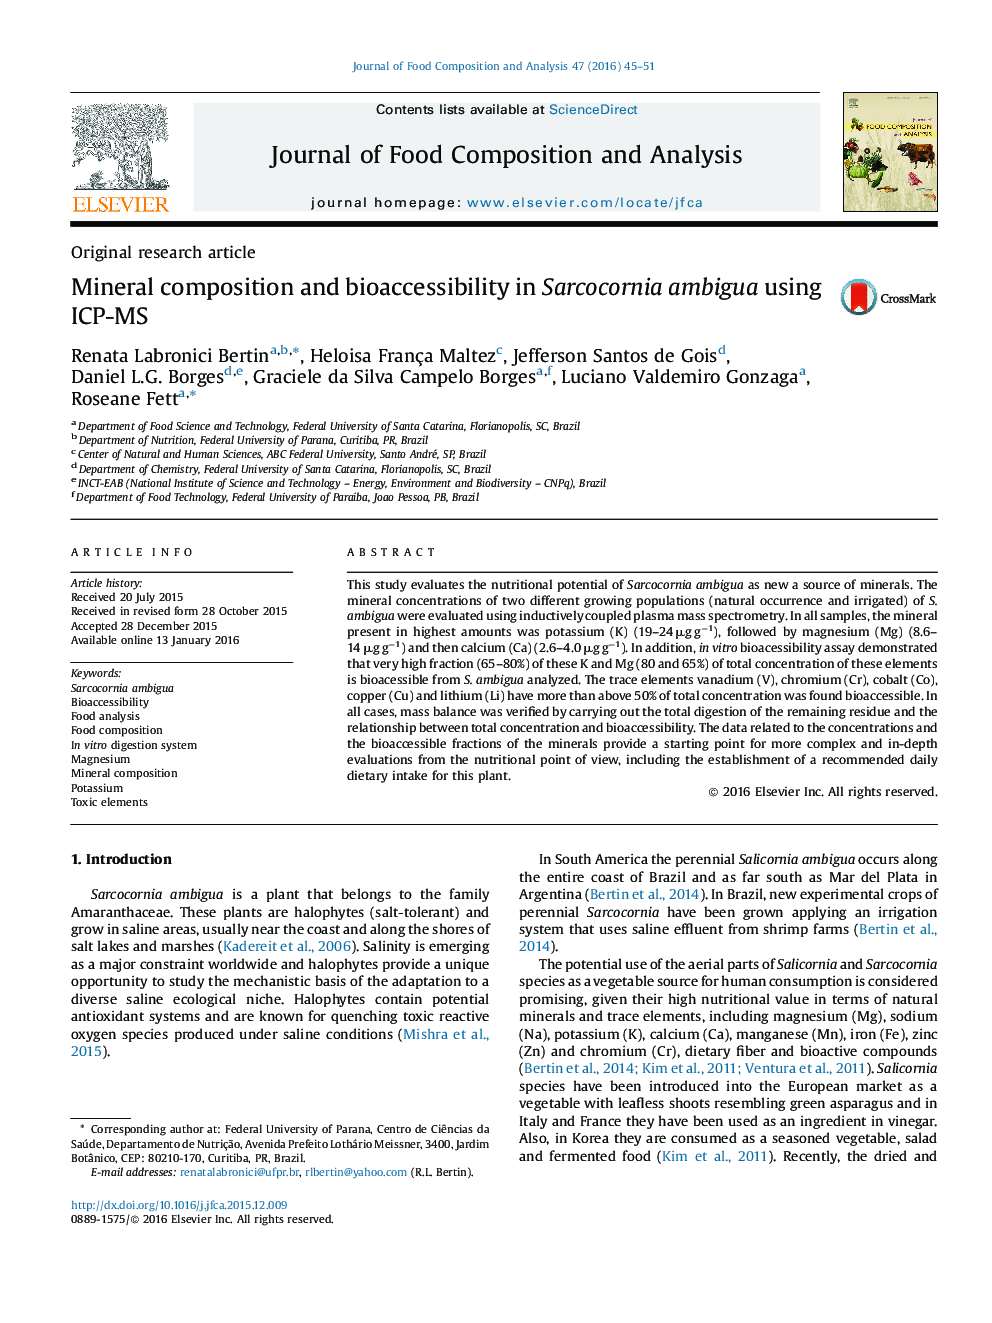 Mineral composition and bioaccessibility in Sarcocornia ambigua using ICP-MS